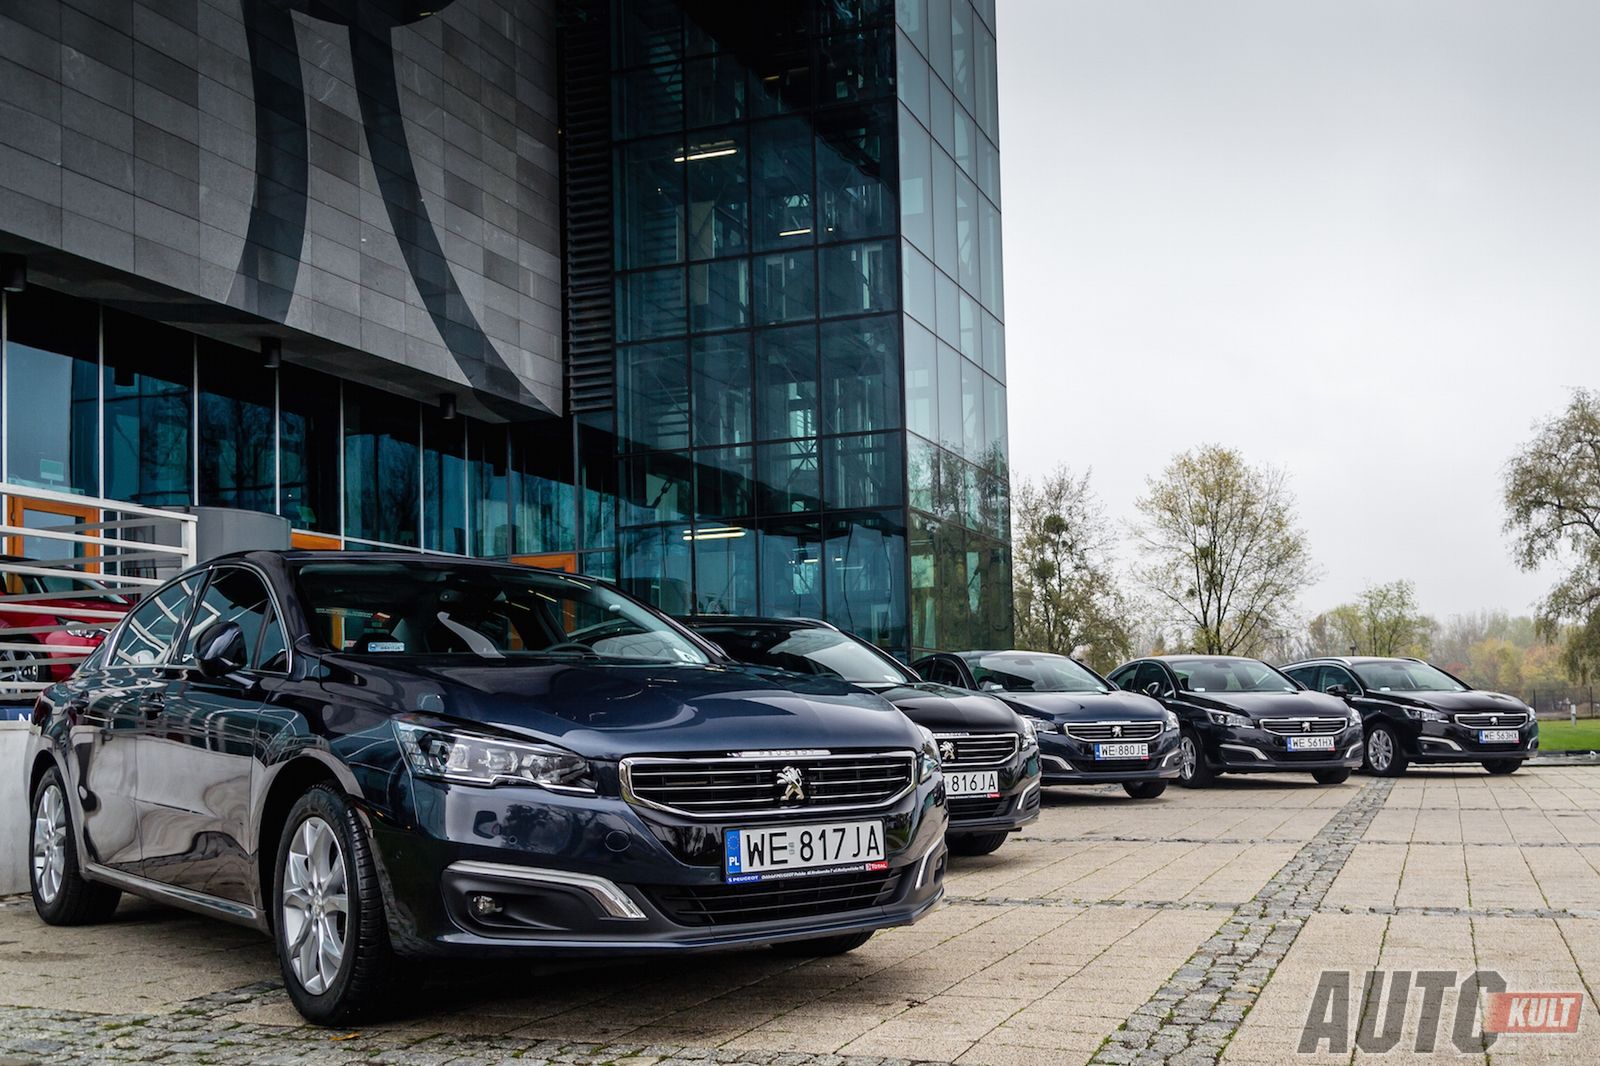 Nowy Peugeot 508 SW 2,0 HDI A6 (AM3) Active pierwsza